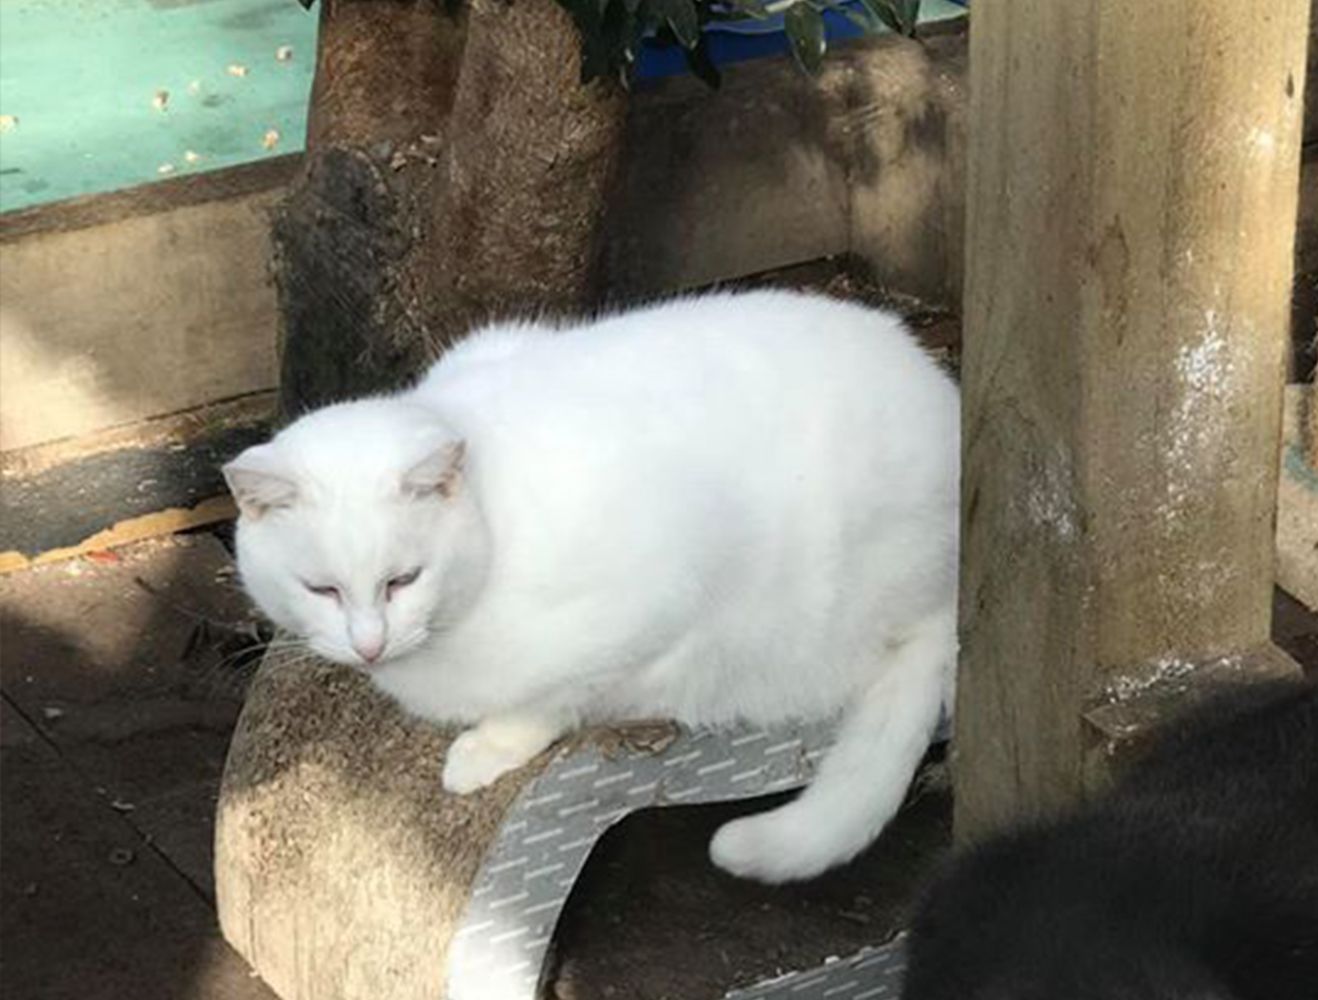 Luca is deaf. We tried to adopt him out but he wouldn't settle so he came back to the sanctuary where he feels safe and secure. He has lots of cat friends and is a favourite of the volunteers always liking a pat or two.